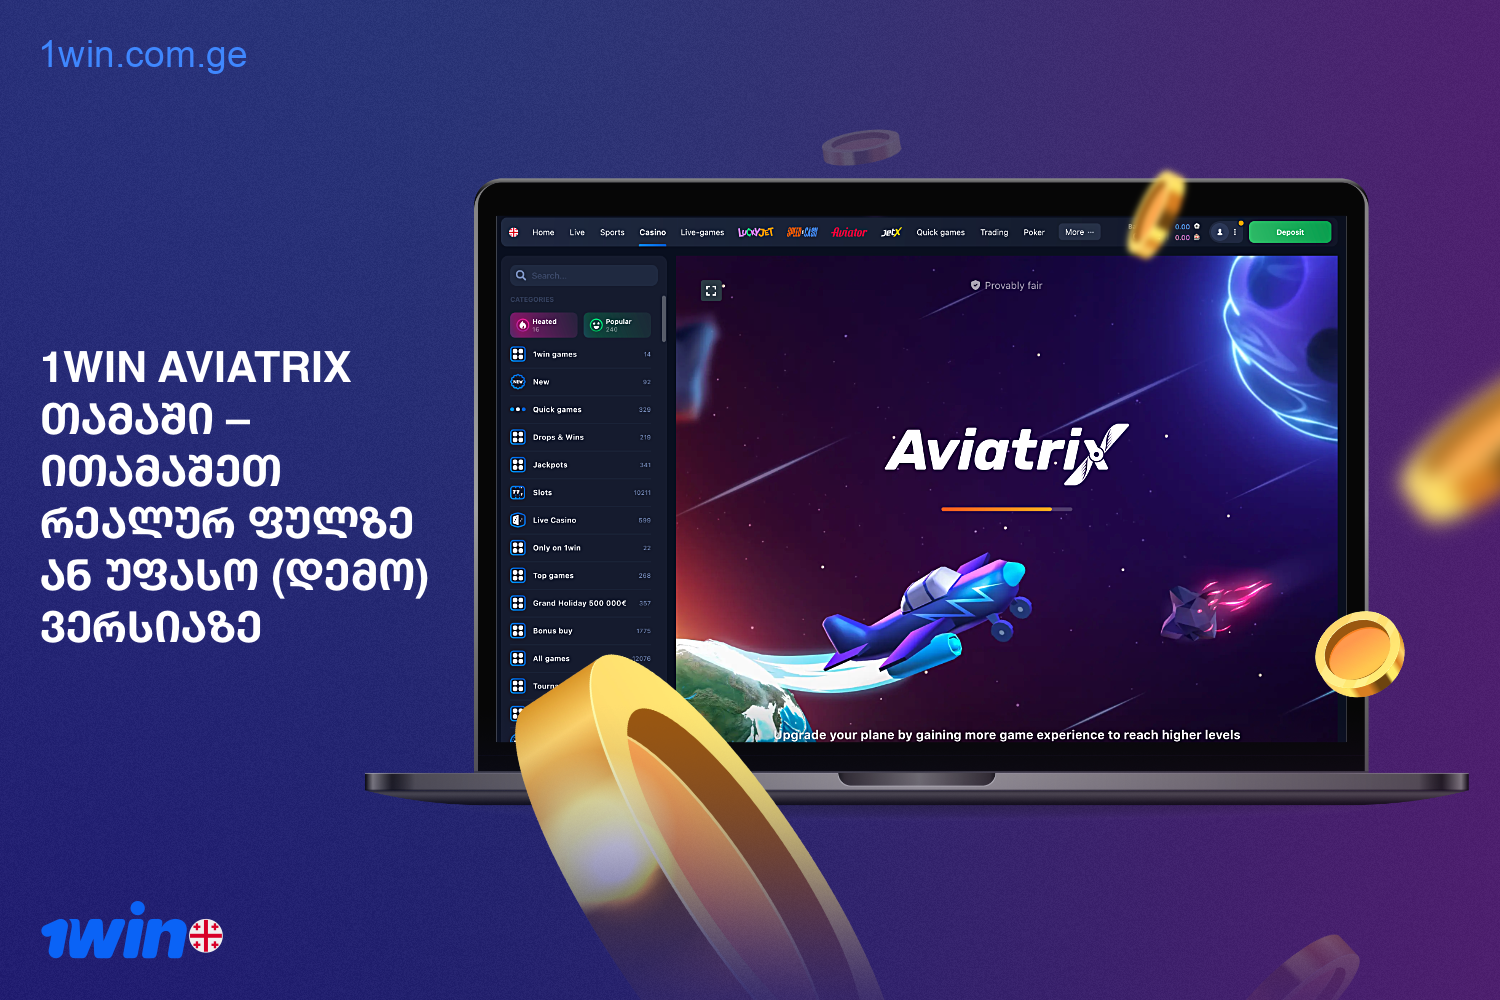 Aviatrix is a popular online game that can be played at 1win for both real money and free demo mode